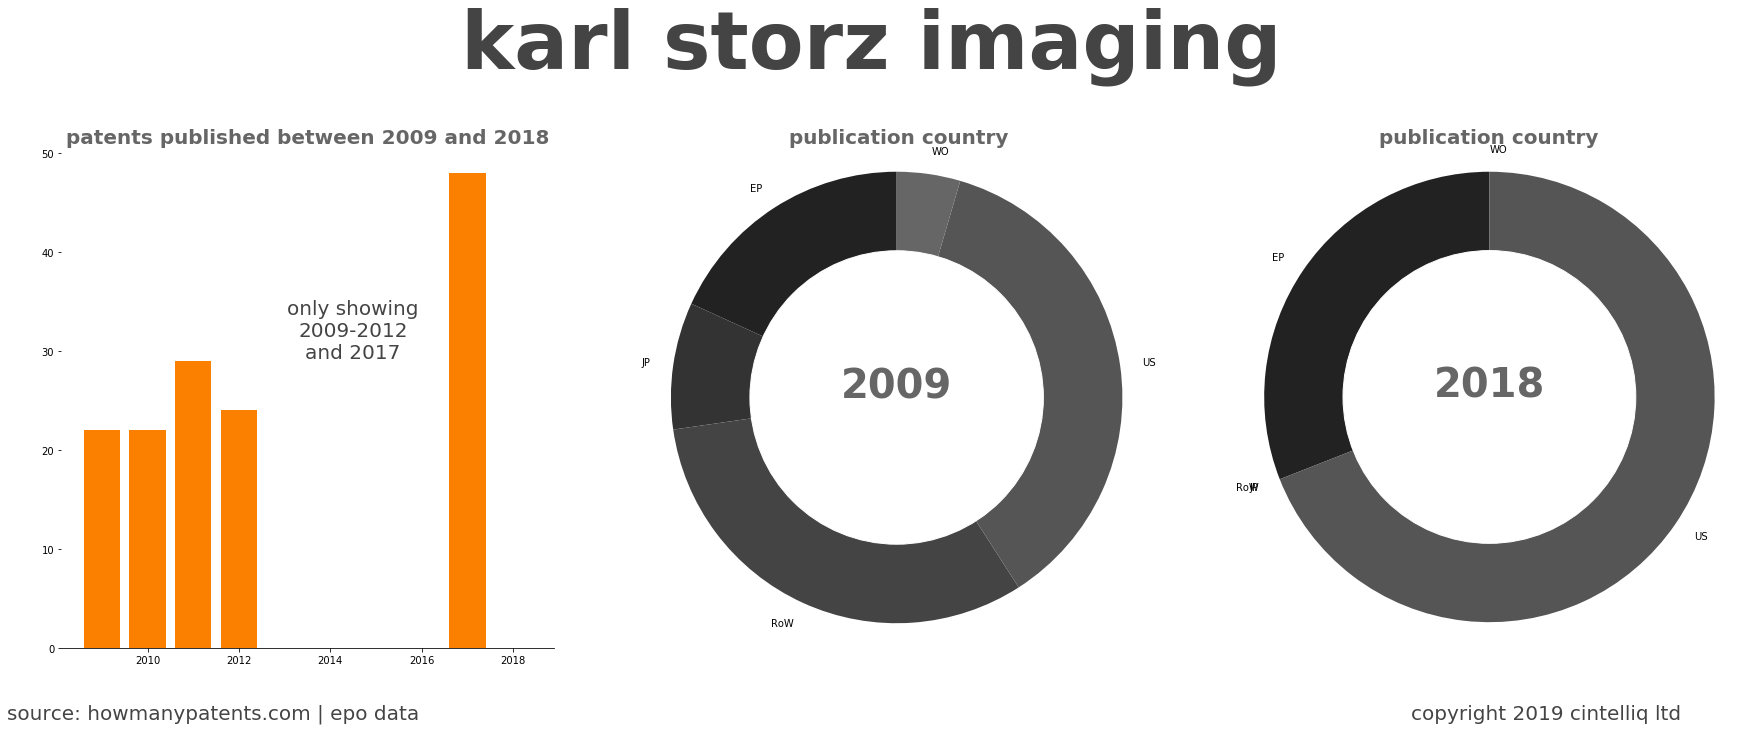 summary of patents for Karl Storz Imaging